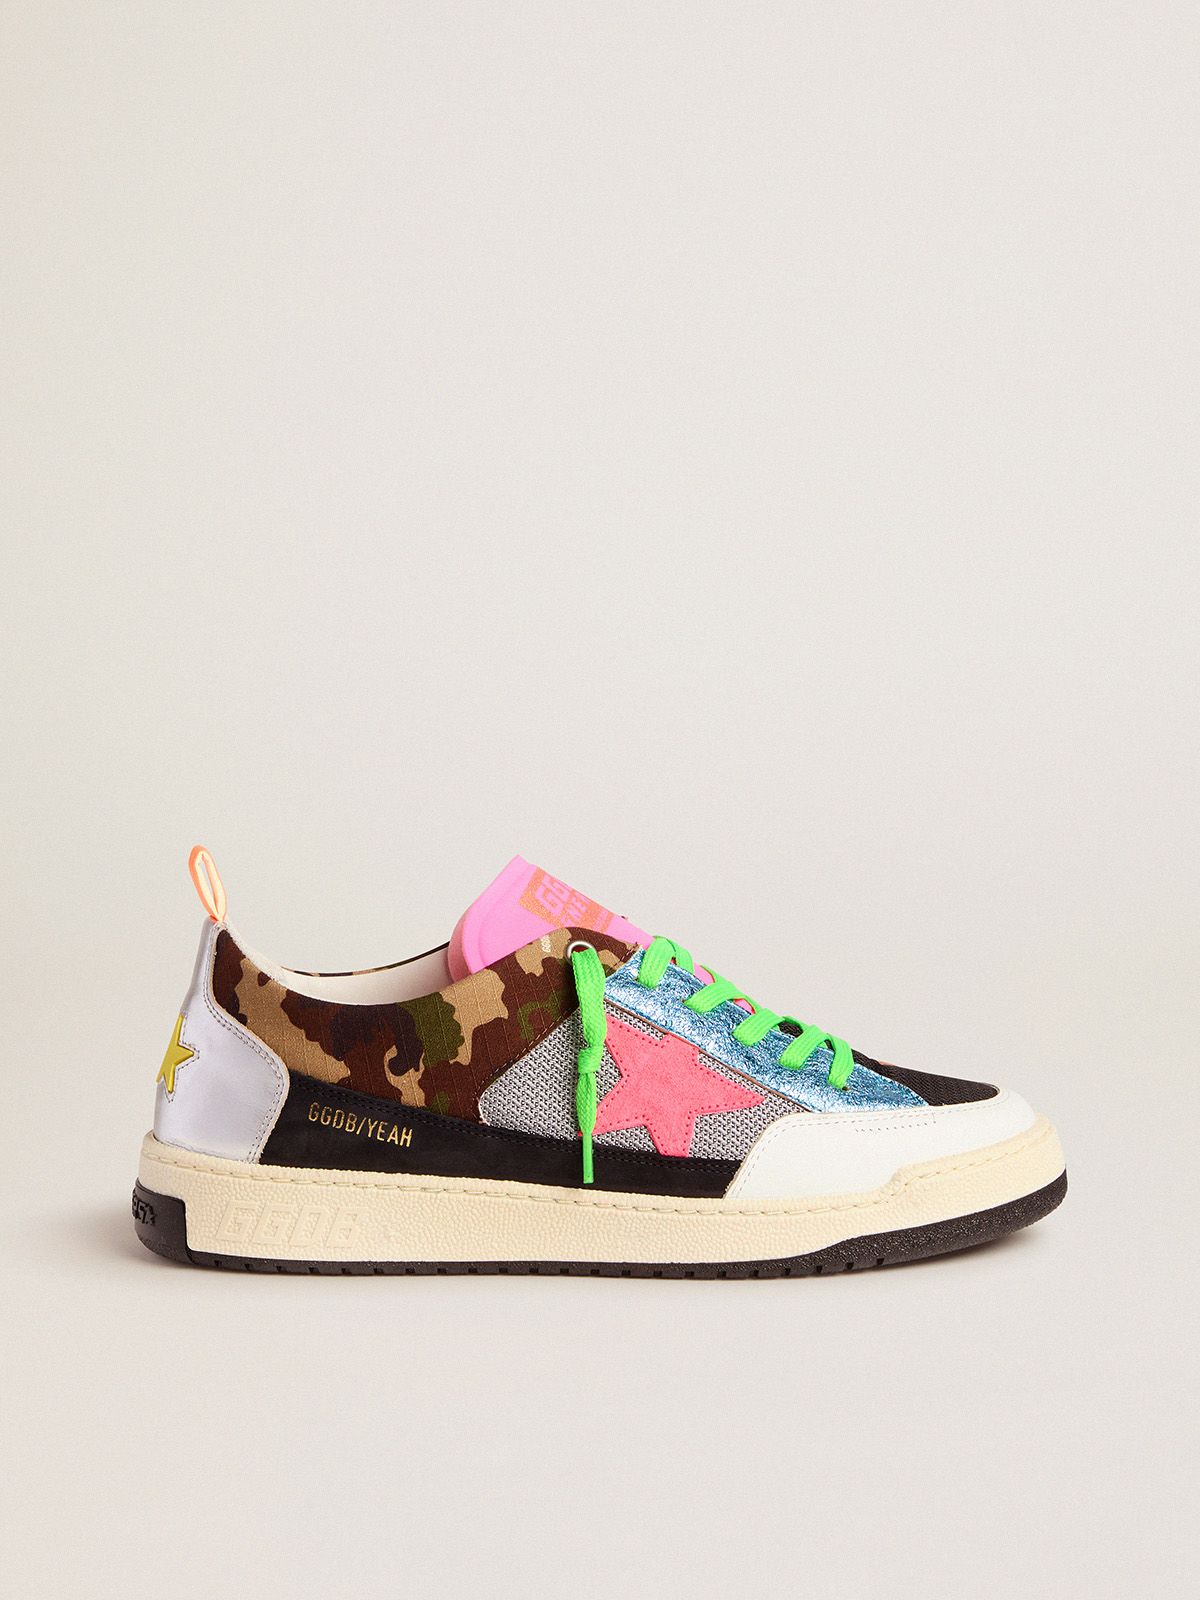 Men’s camouflage Yeah sneakers with fuchsia star